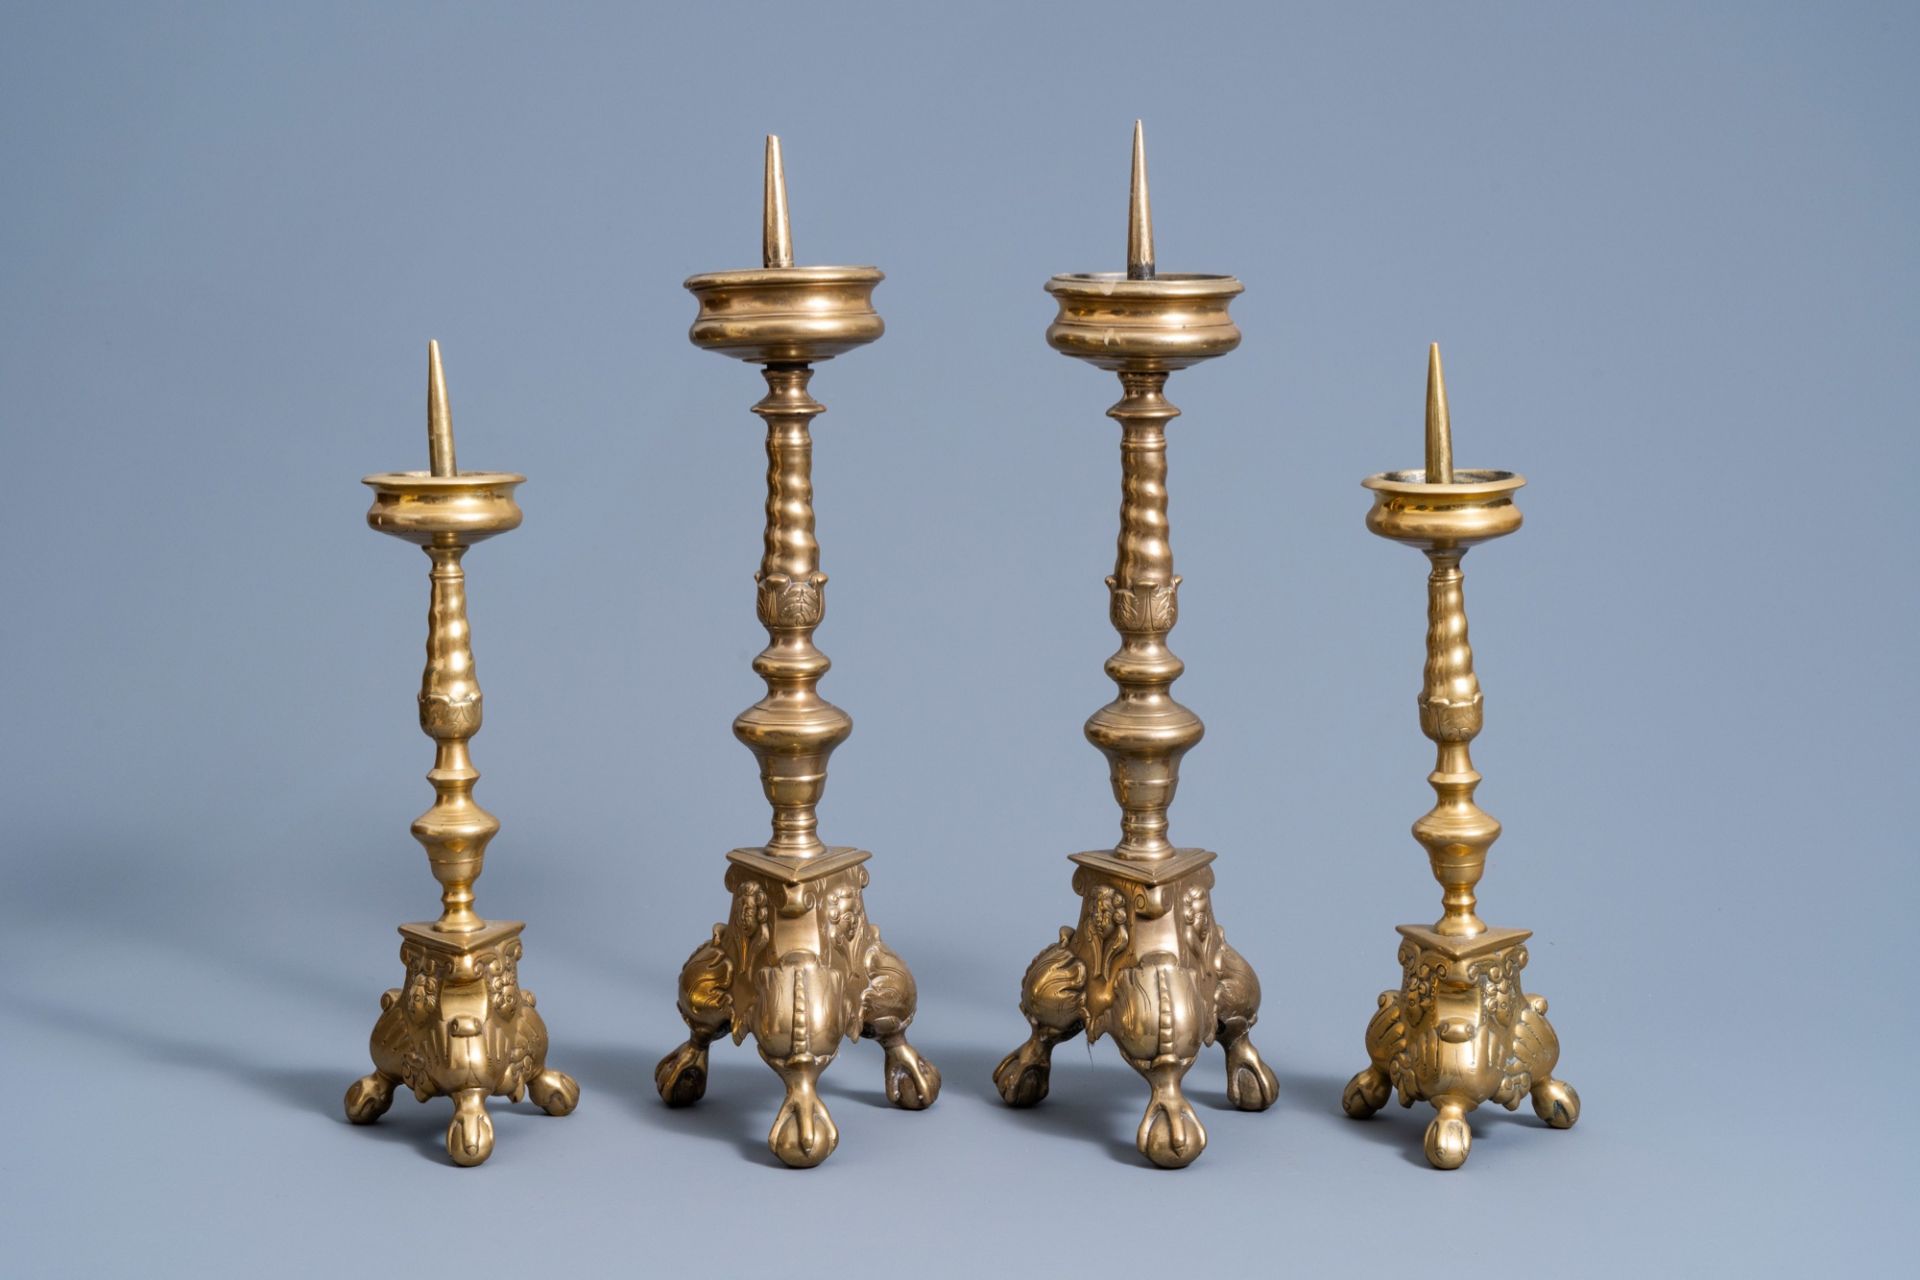 Two pairs of bronze pricket candlesticks, Flanders or The Netherlands, 17th C. - Image 4 of 7